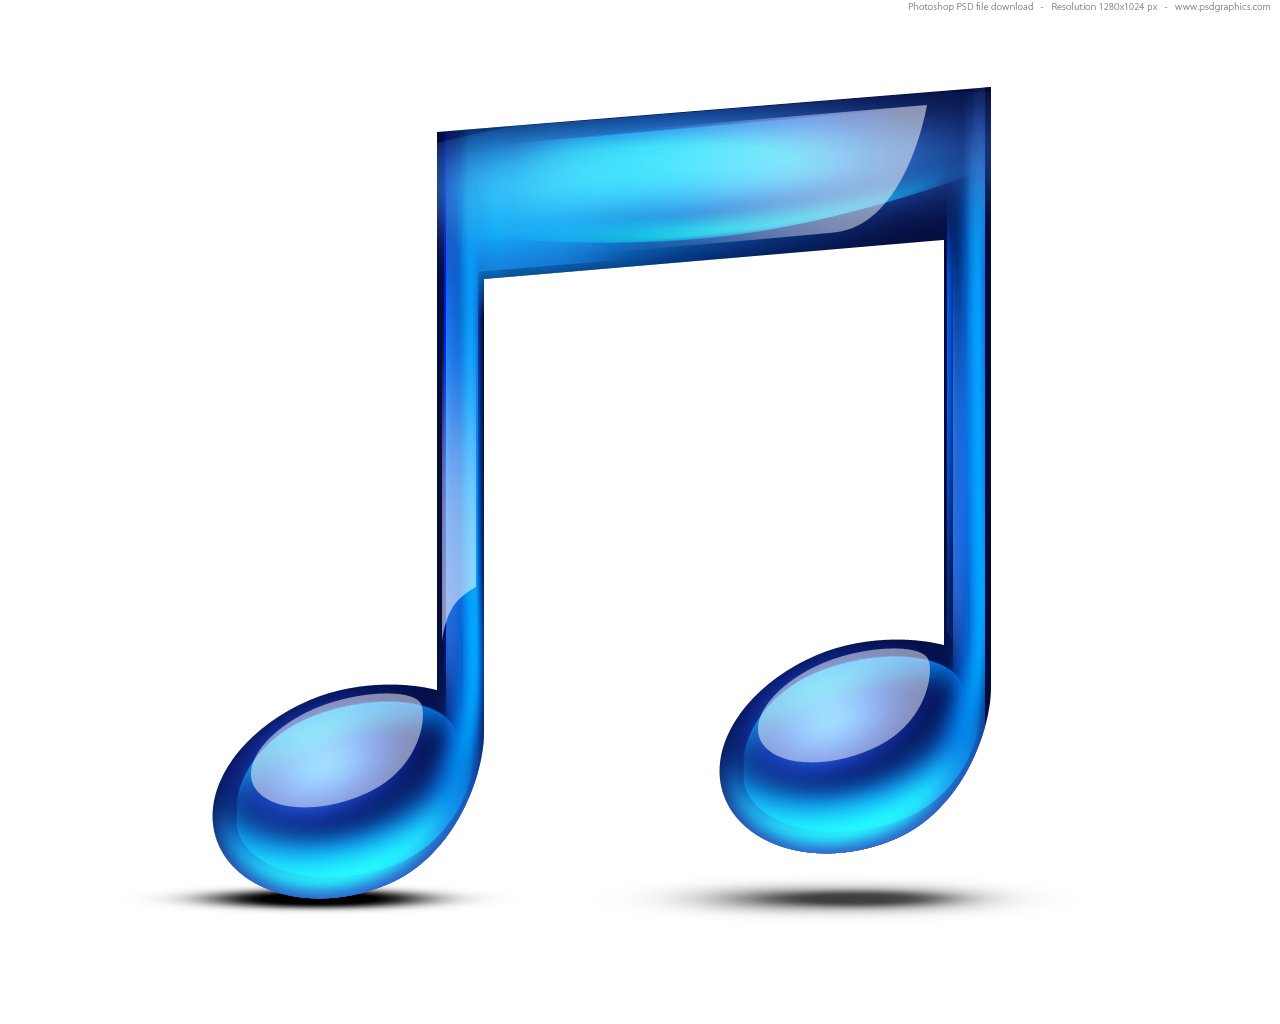 Full size JPG preview: Music note icon